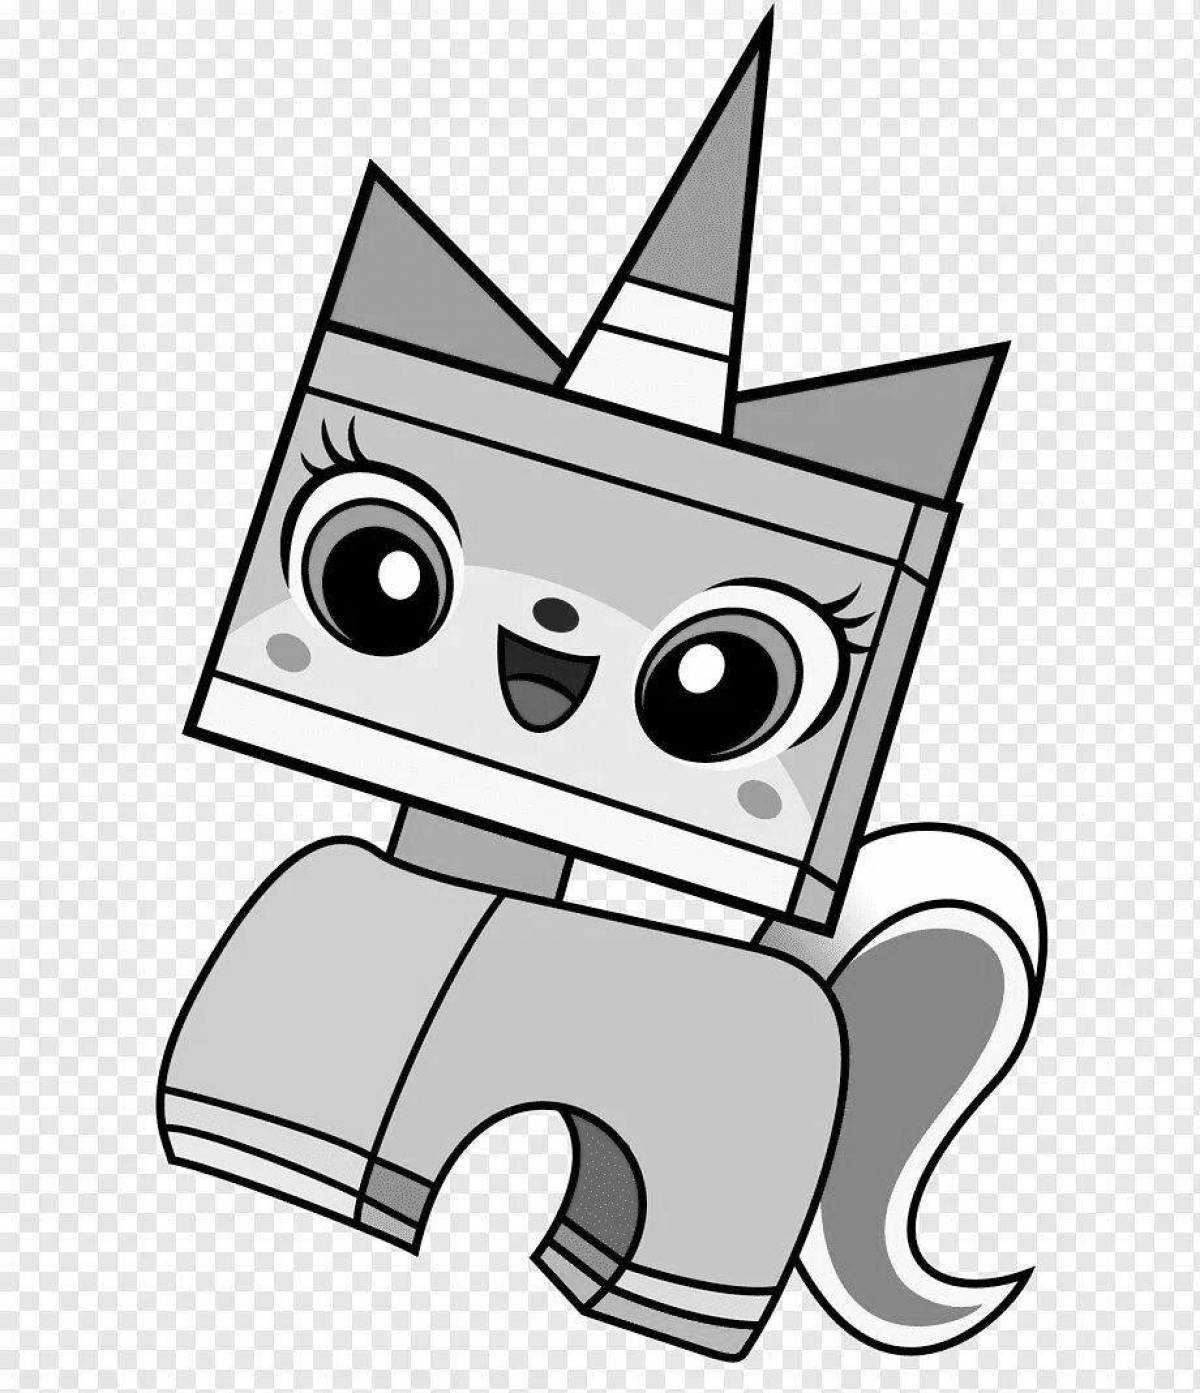 Lego unikitty fairy coloring page